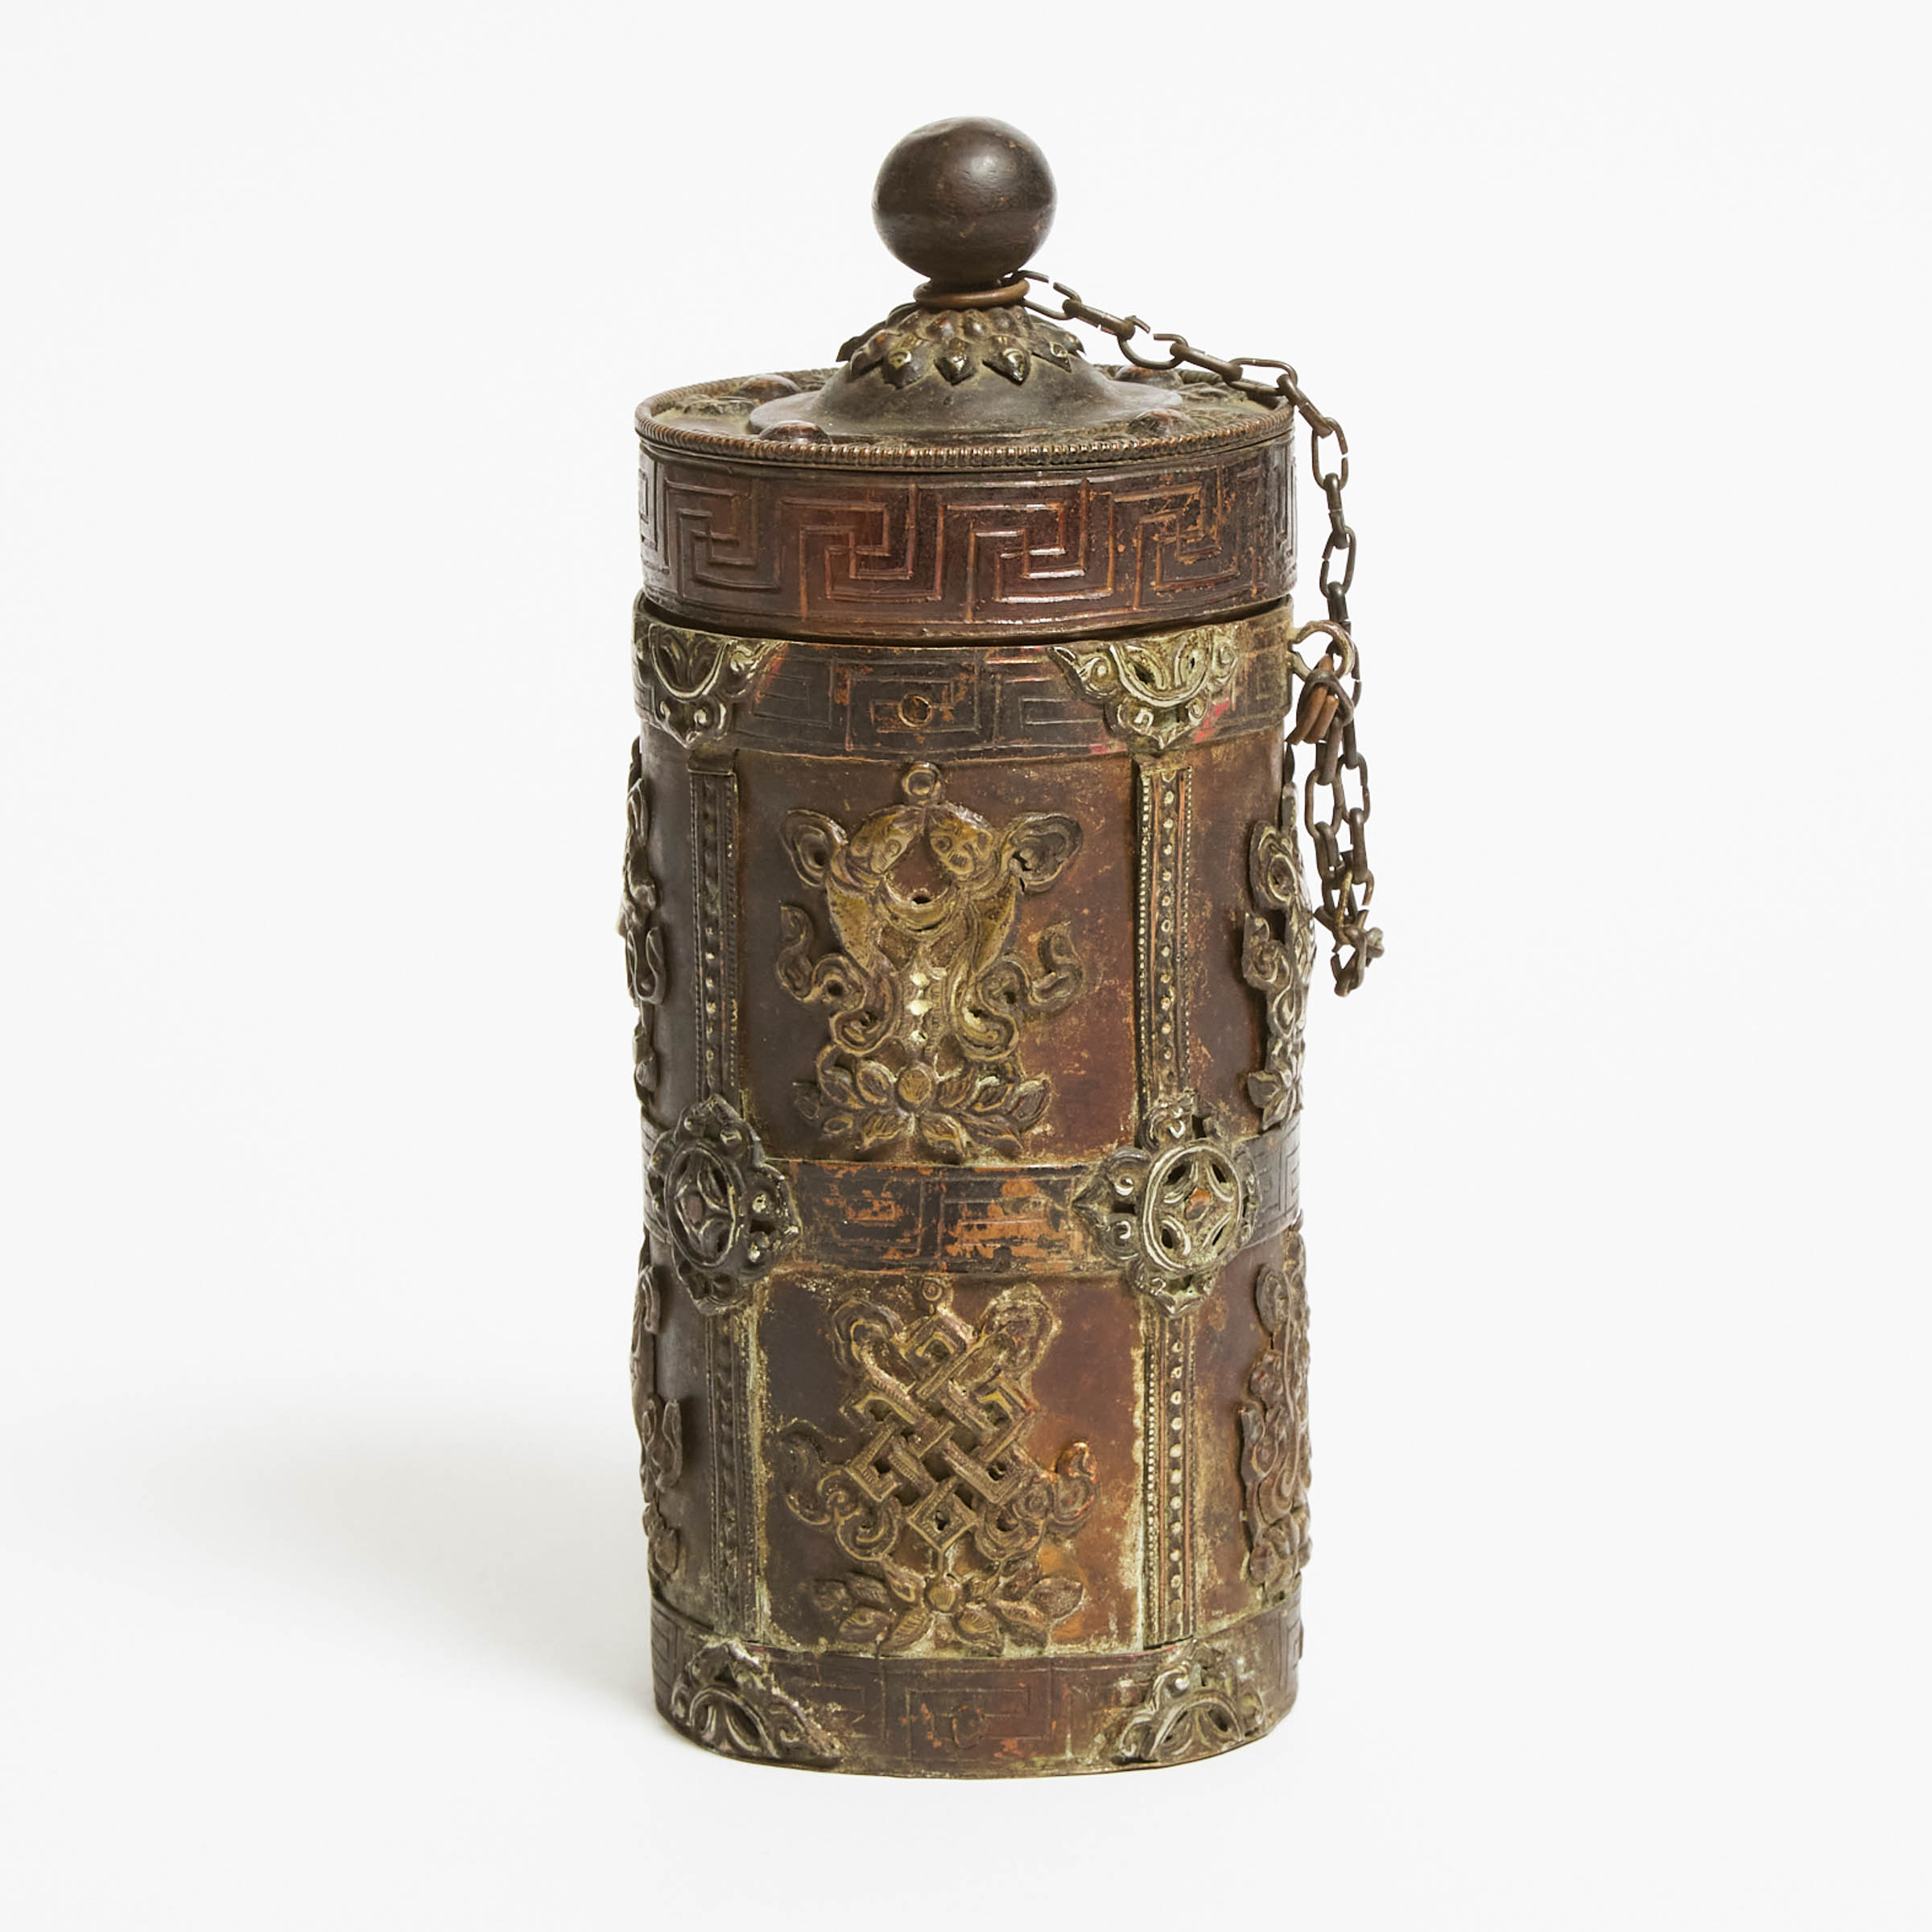 A Tibetan Cylindrical Vessel With